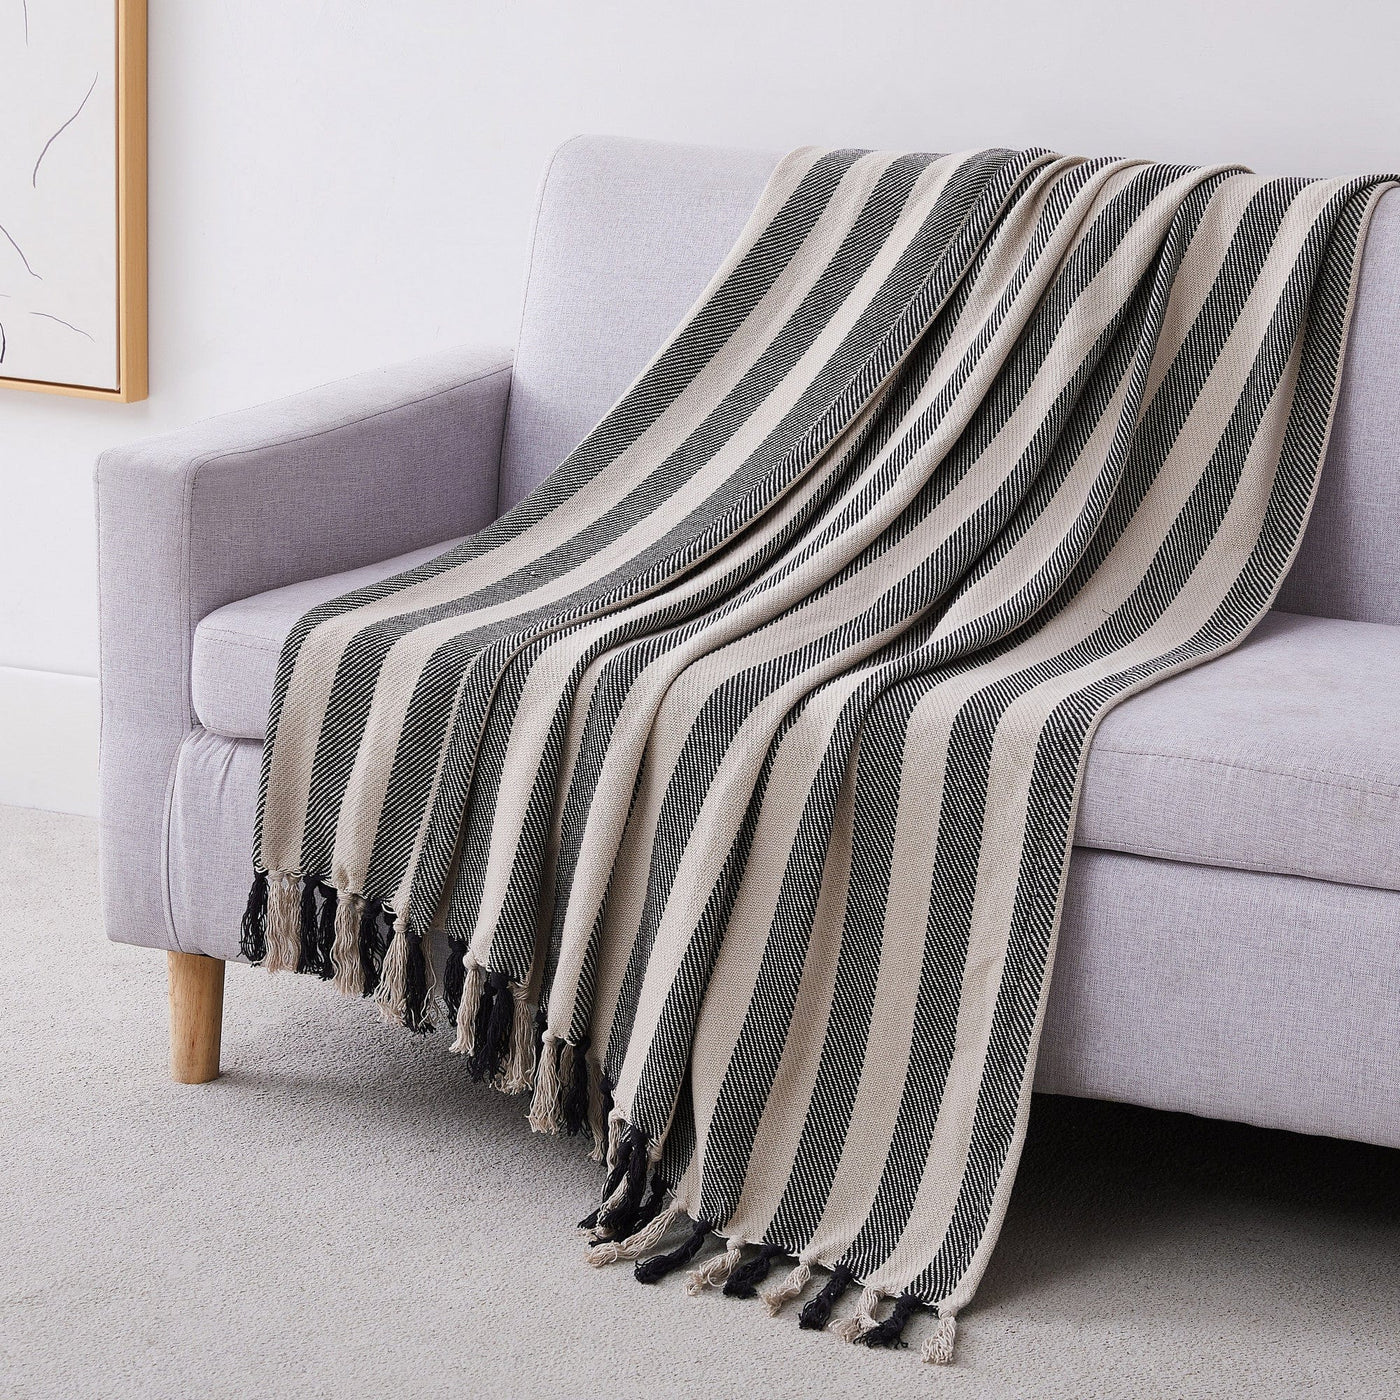 Striped Cotton Blankets and Throws in Black on Sofa#color_striped-black